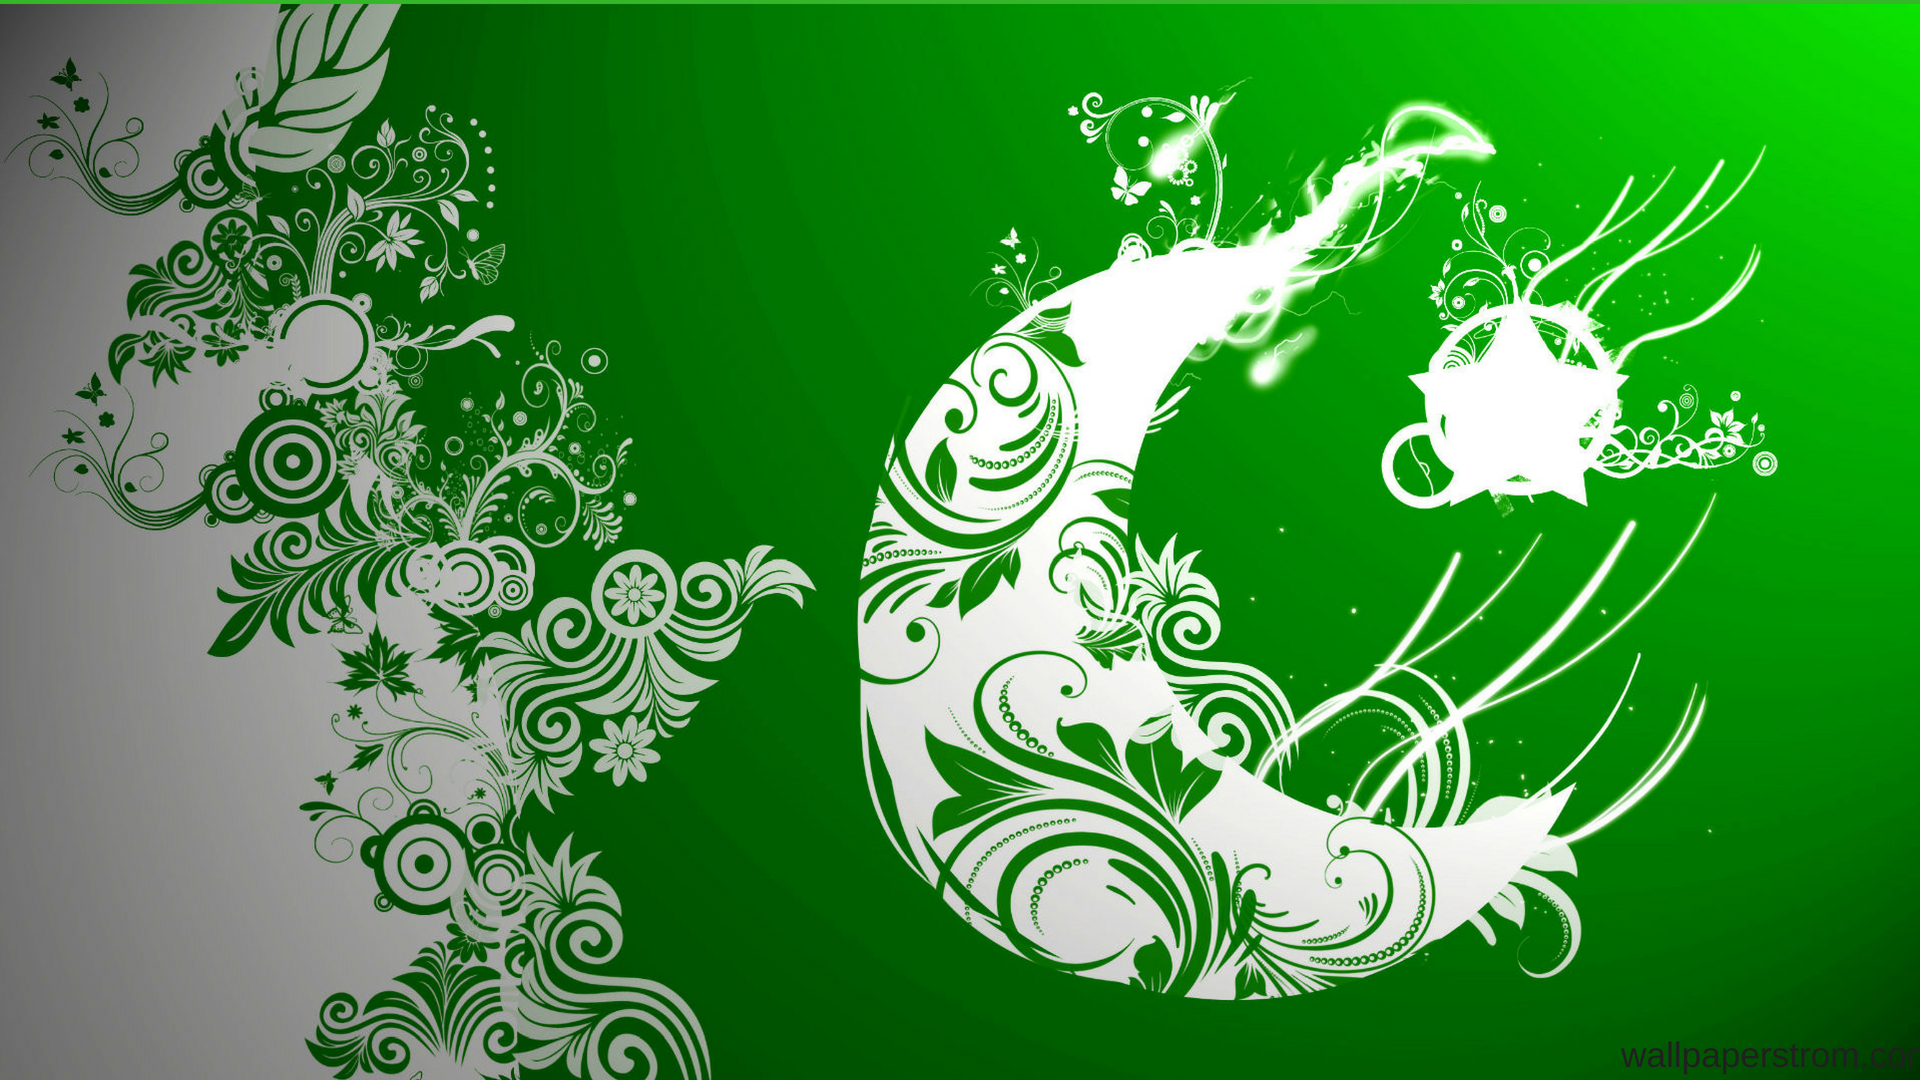 Pakistan Flag Independence Day Wallpapers Download - Backgrounds For 14 August - HD Wallpaper 